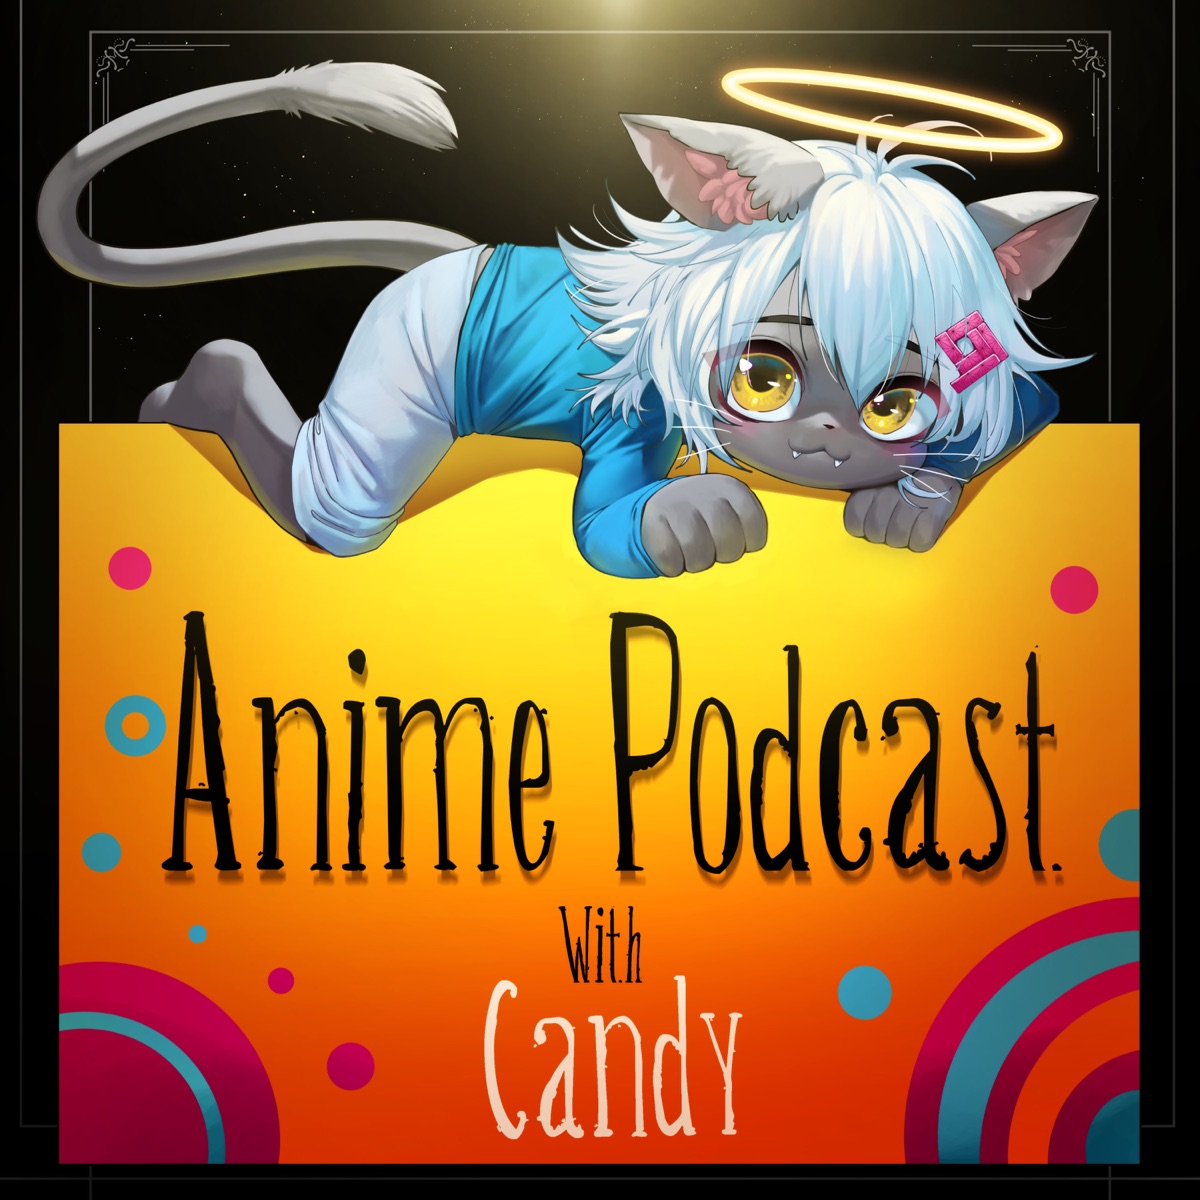 Listener Numbers, Contacts, Similar Podcasts - Life With Anime Podcast